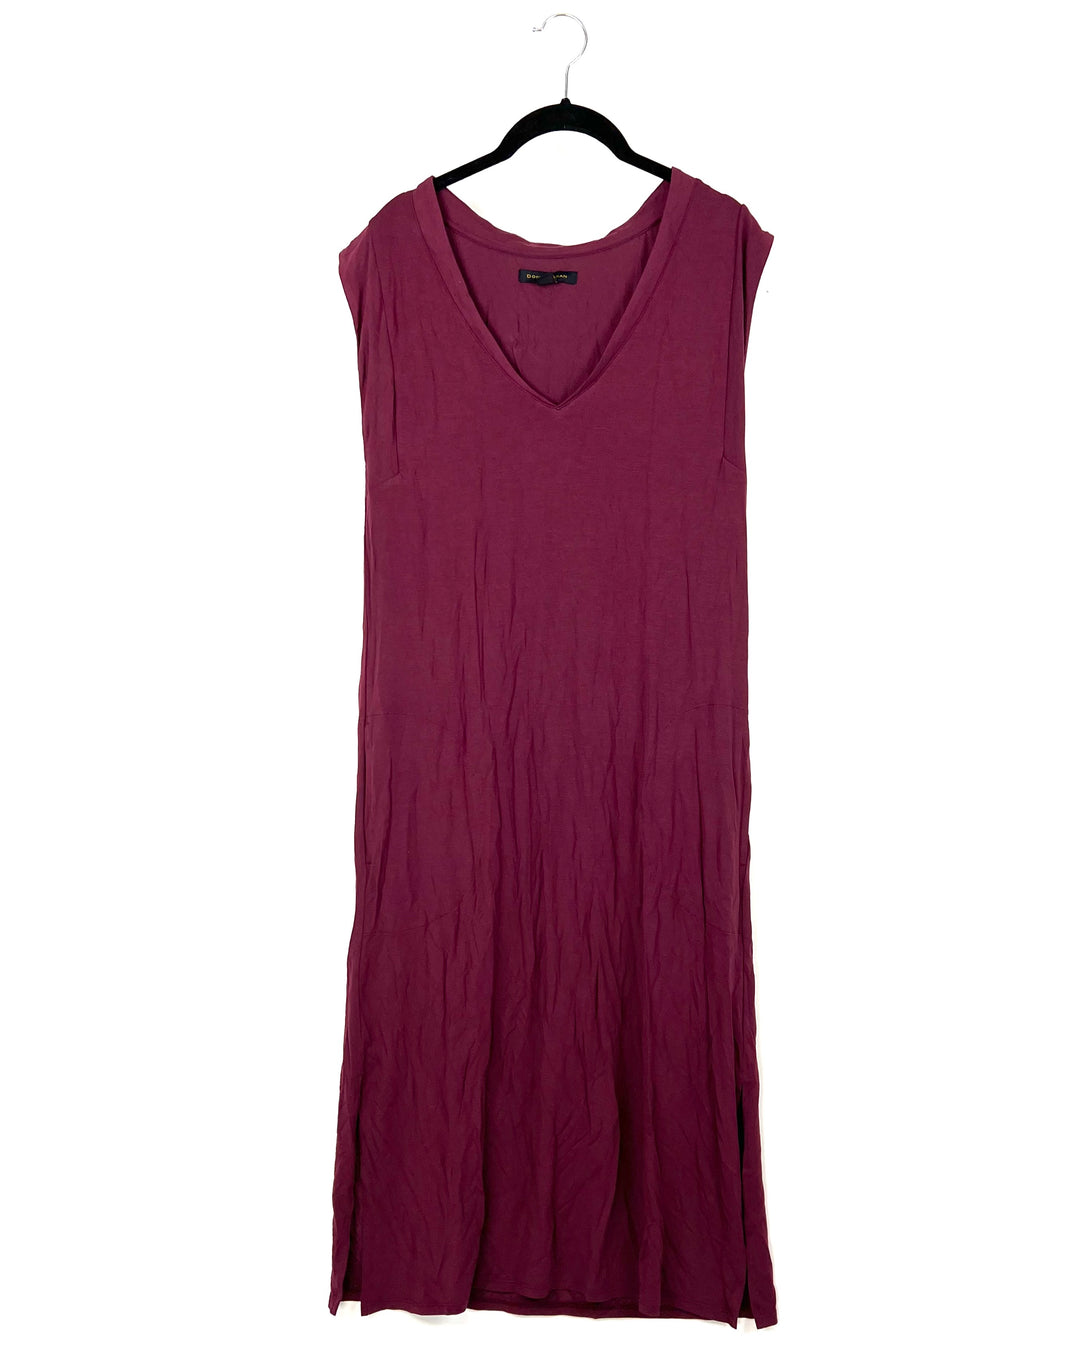 Maroon Nightgown With Pockets - Size 4/6